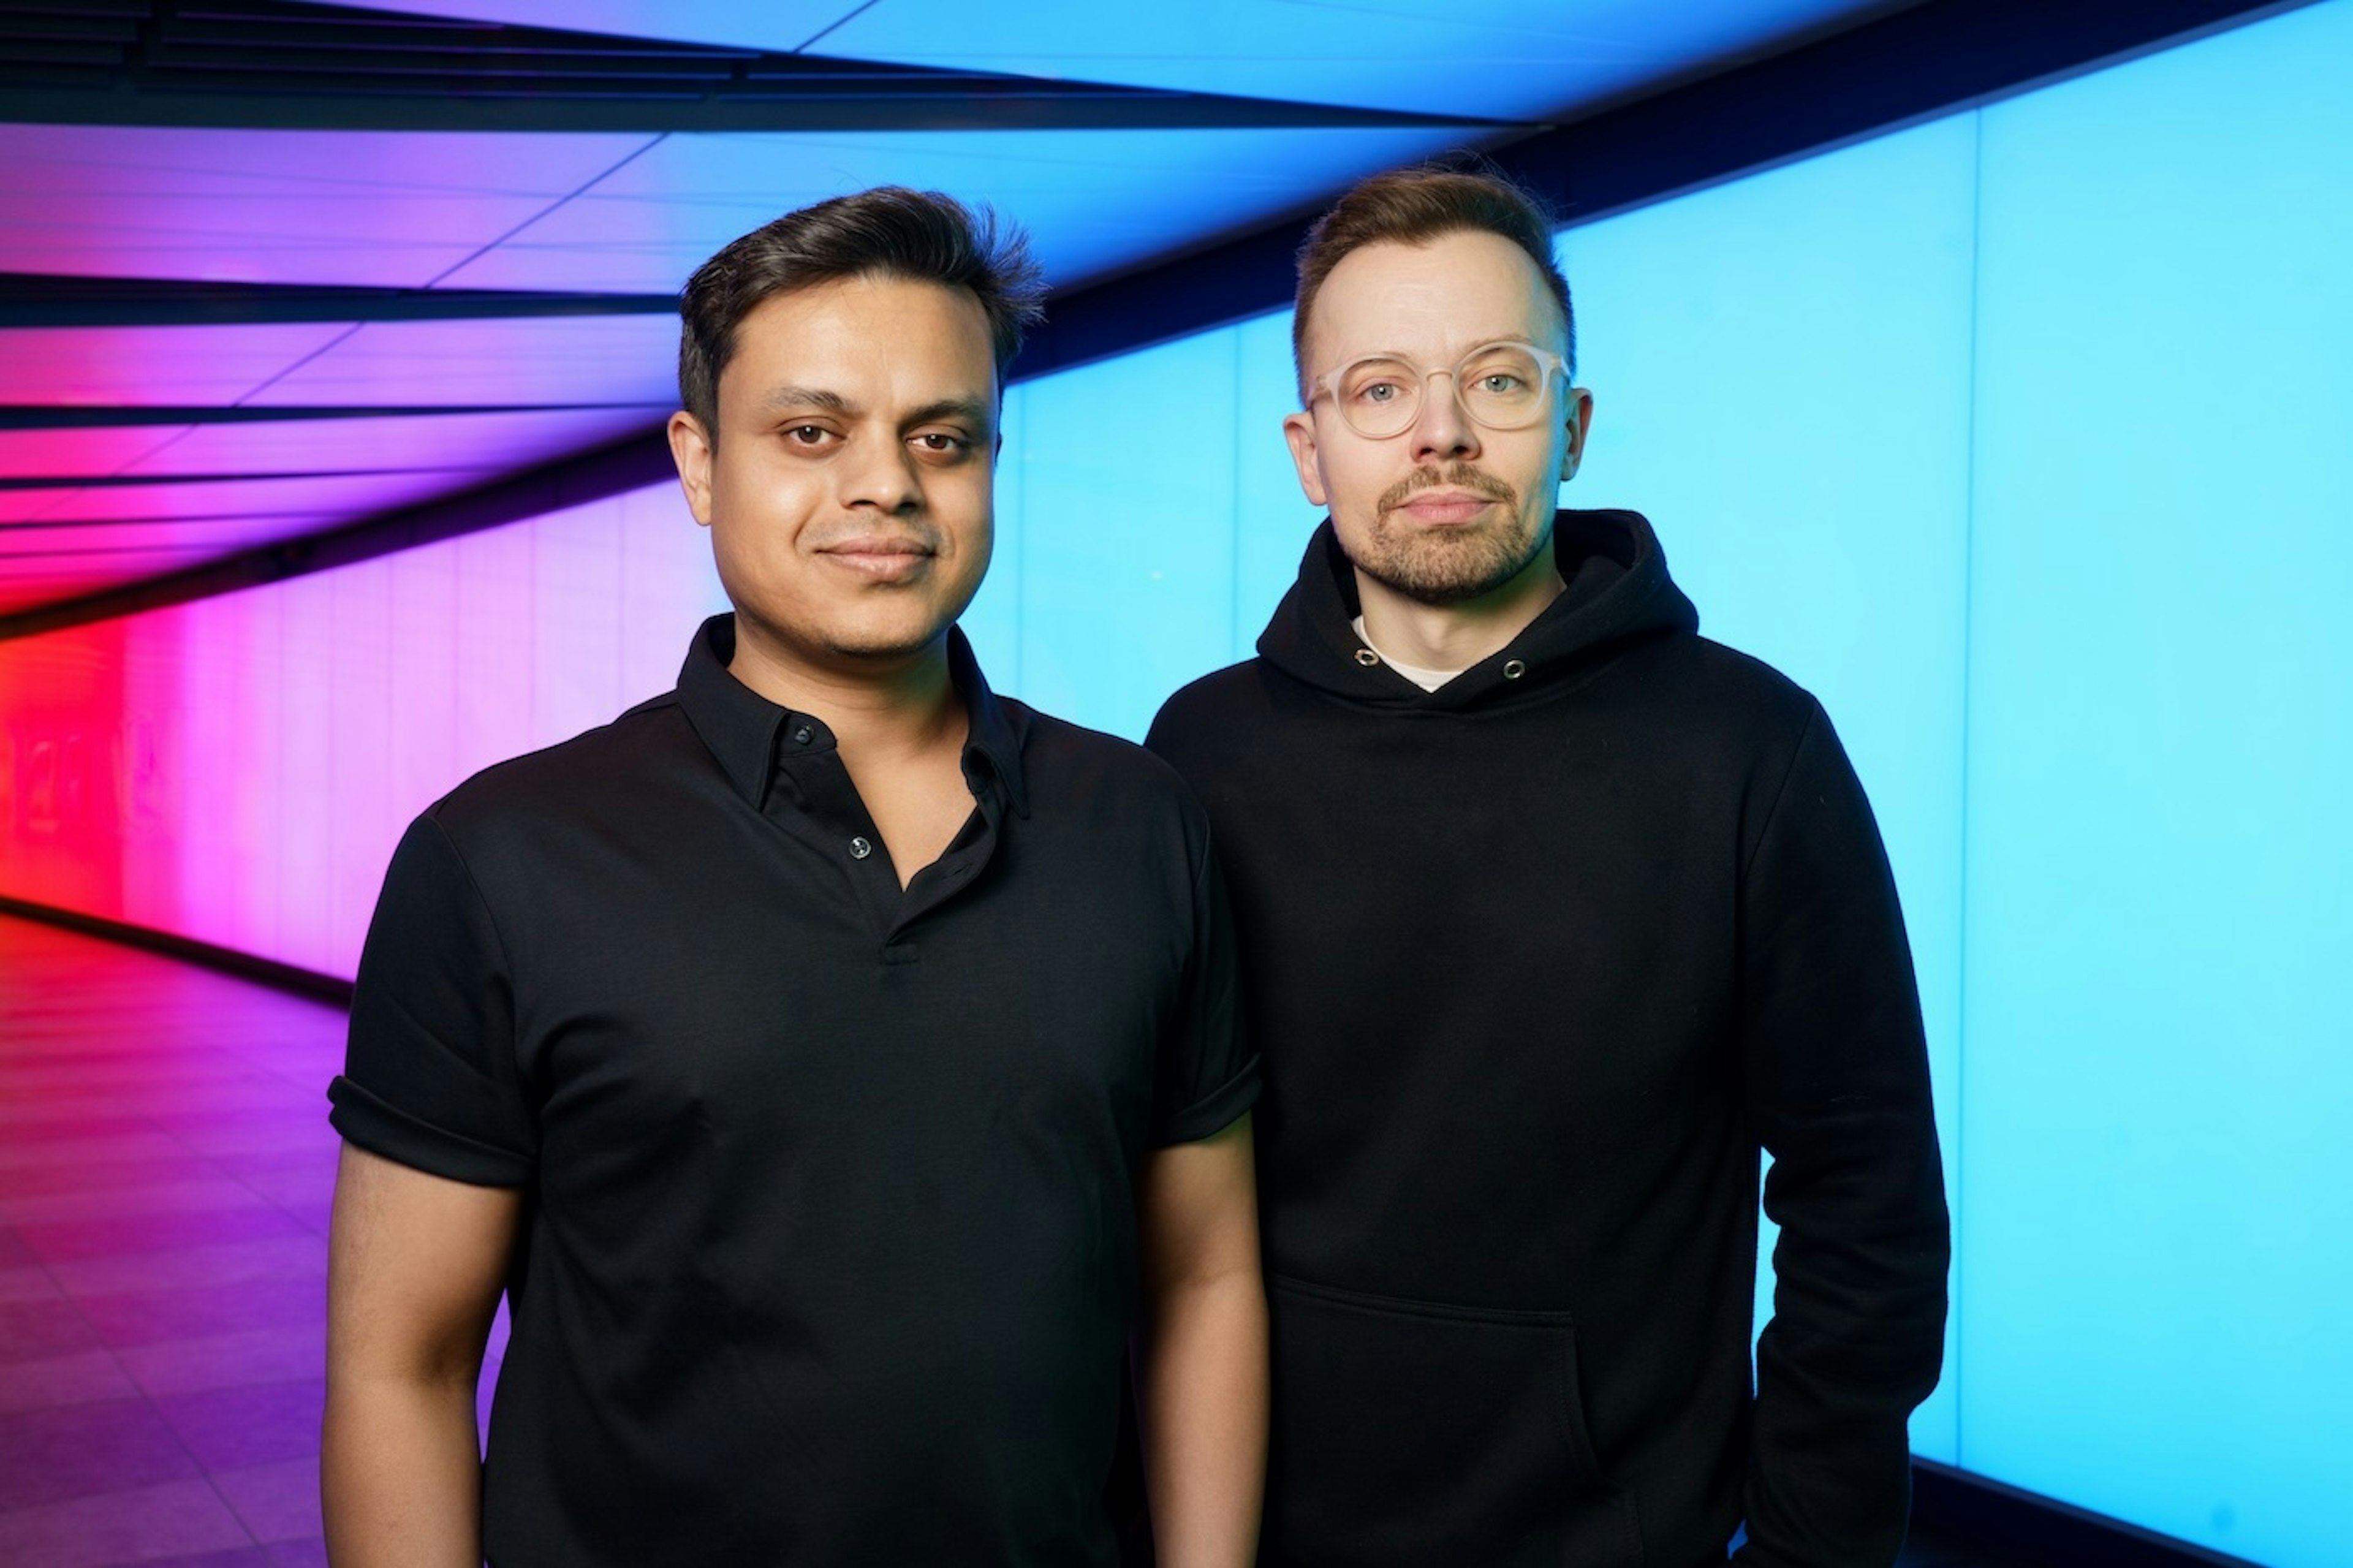 Lukky Ahmed (left) and Kamil Kluza (right), cofounders of Climate X. Courtesy of Climate X